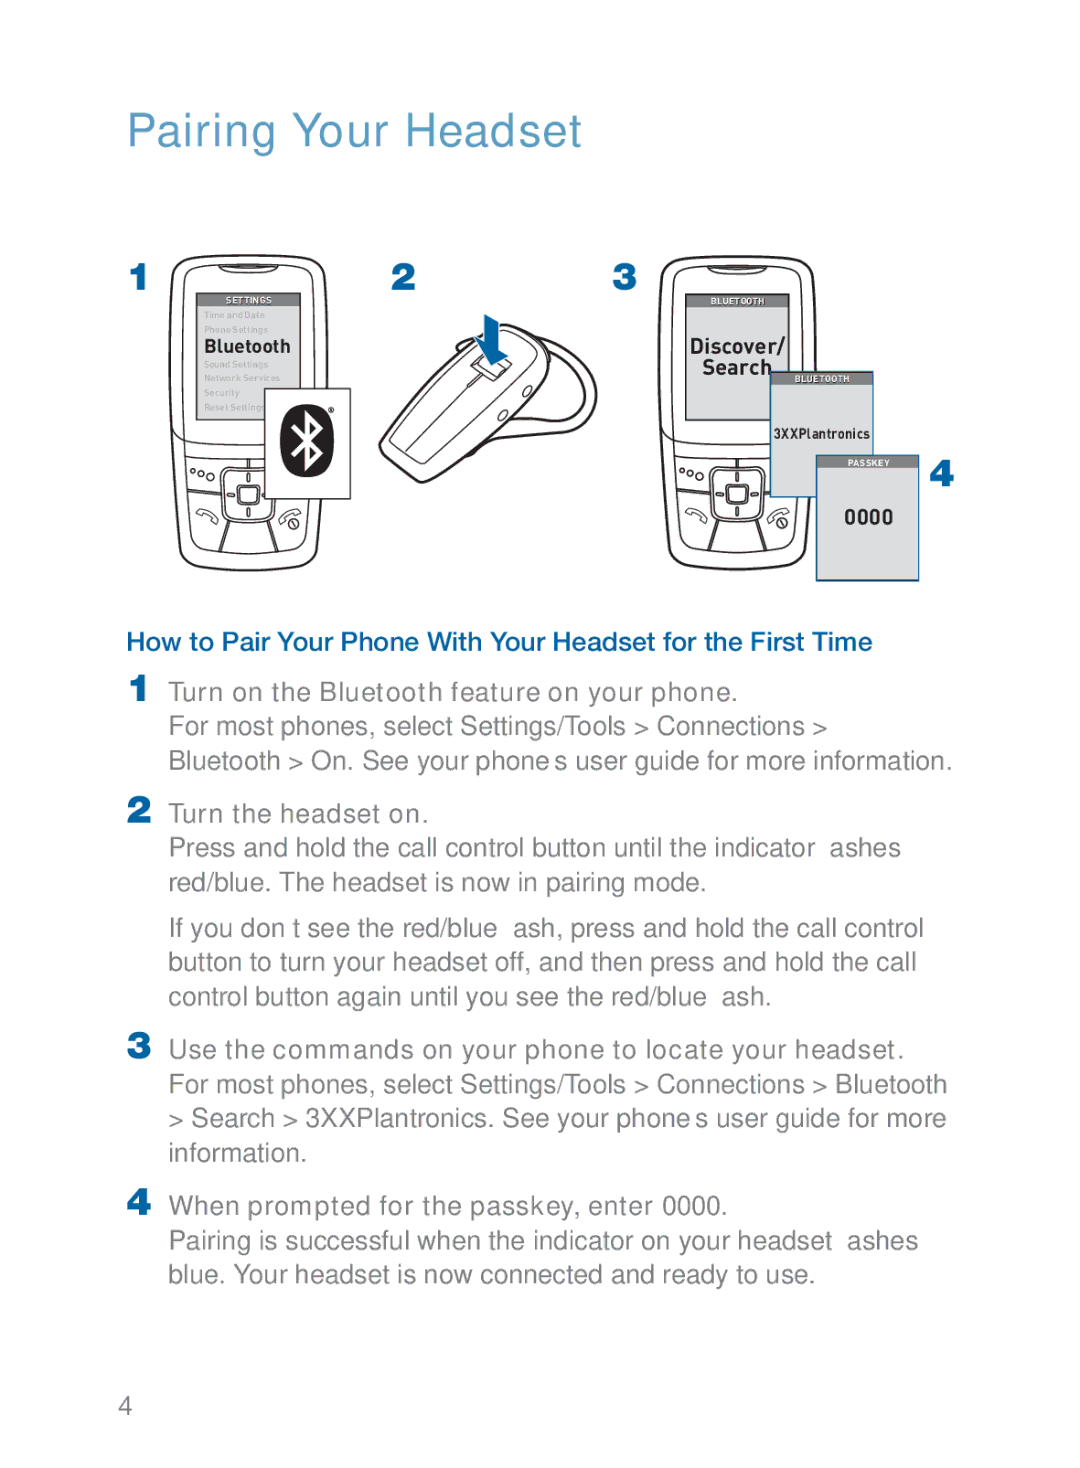 Plantronics 370 manual Turn on the Bluetooth feature on your phone 